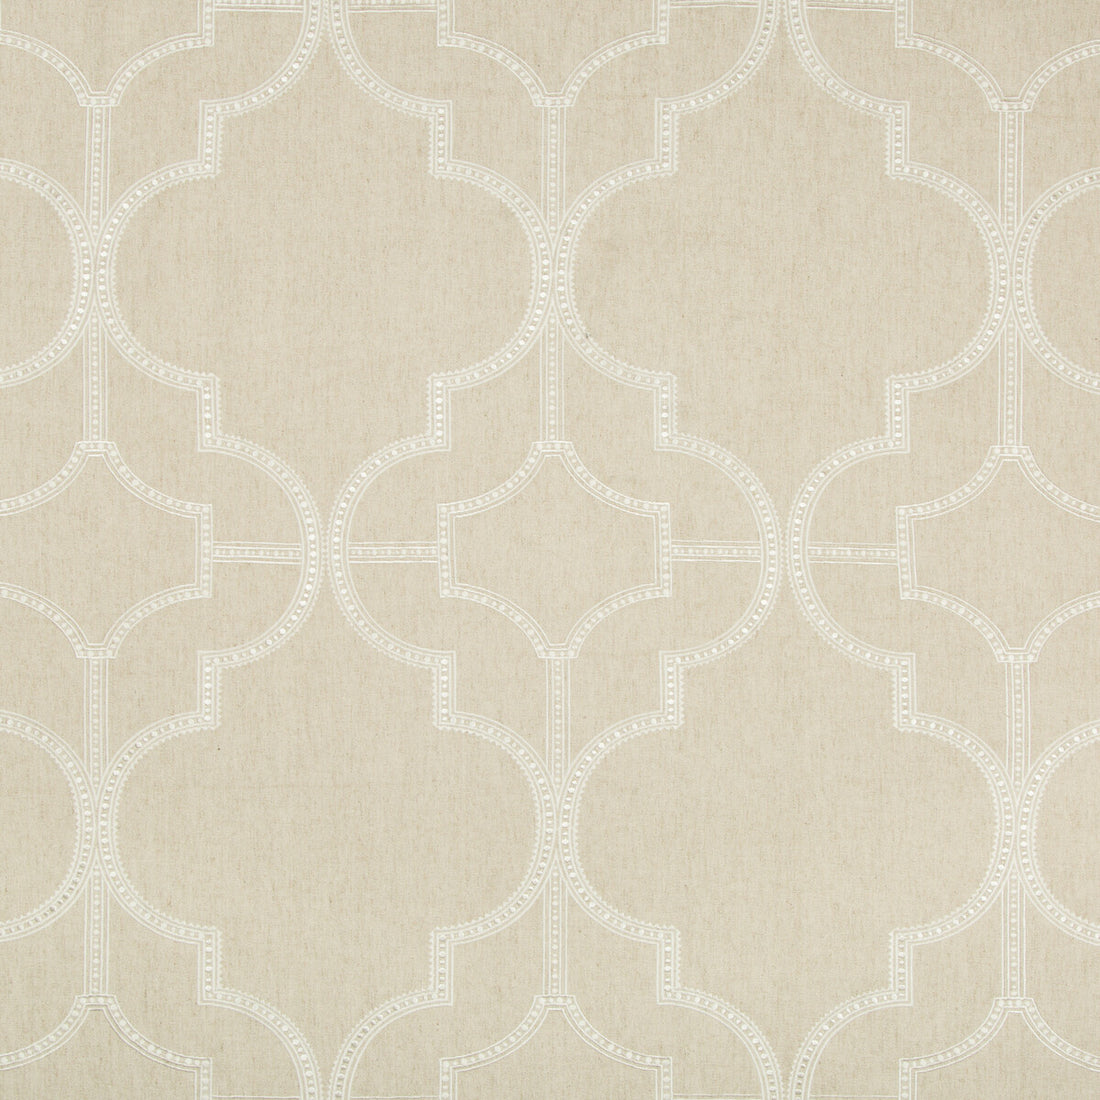 Wing Tip fabric in linen color - pattern 4364.16.0 - by Kravet Couture in the David Phoenix Well-Suited collection